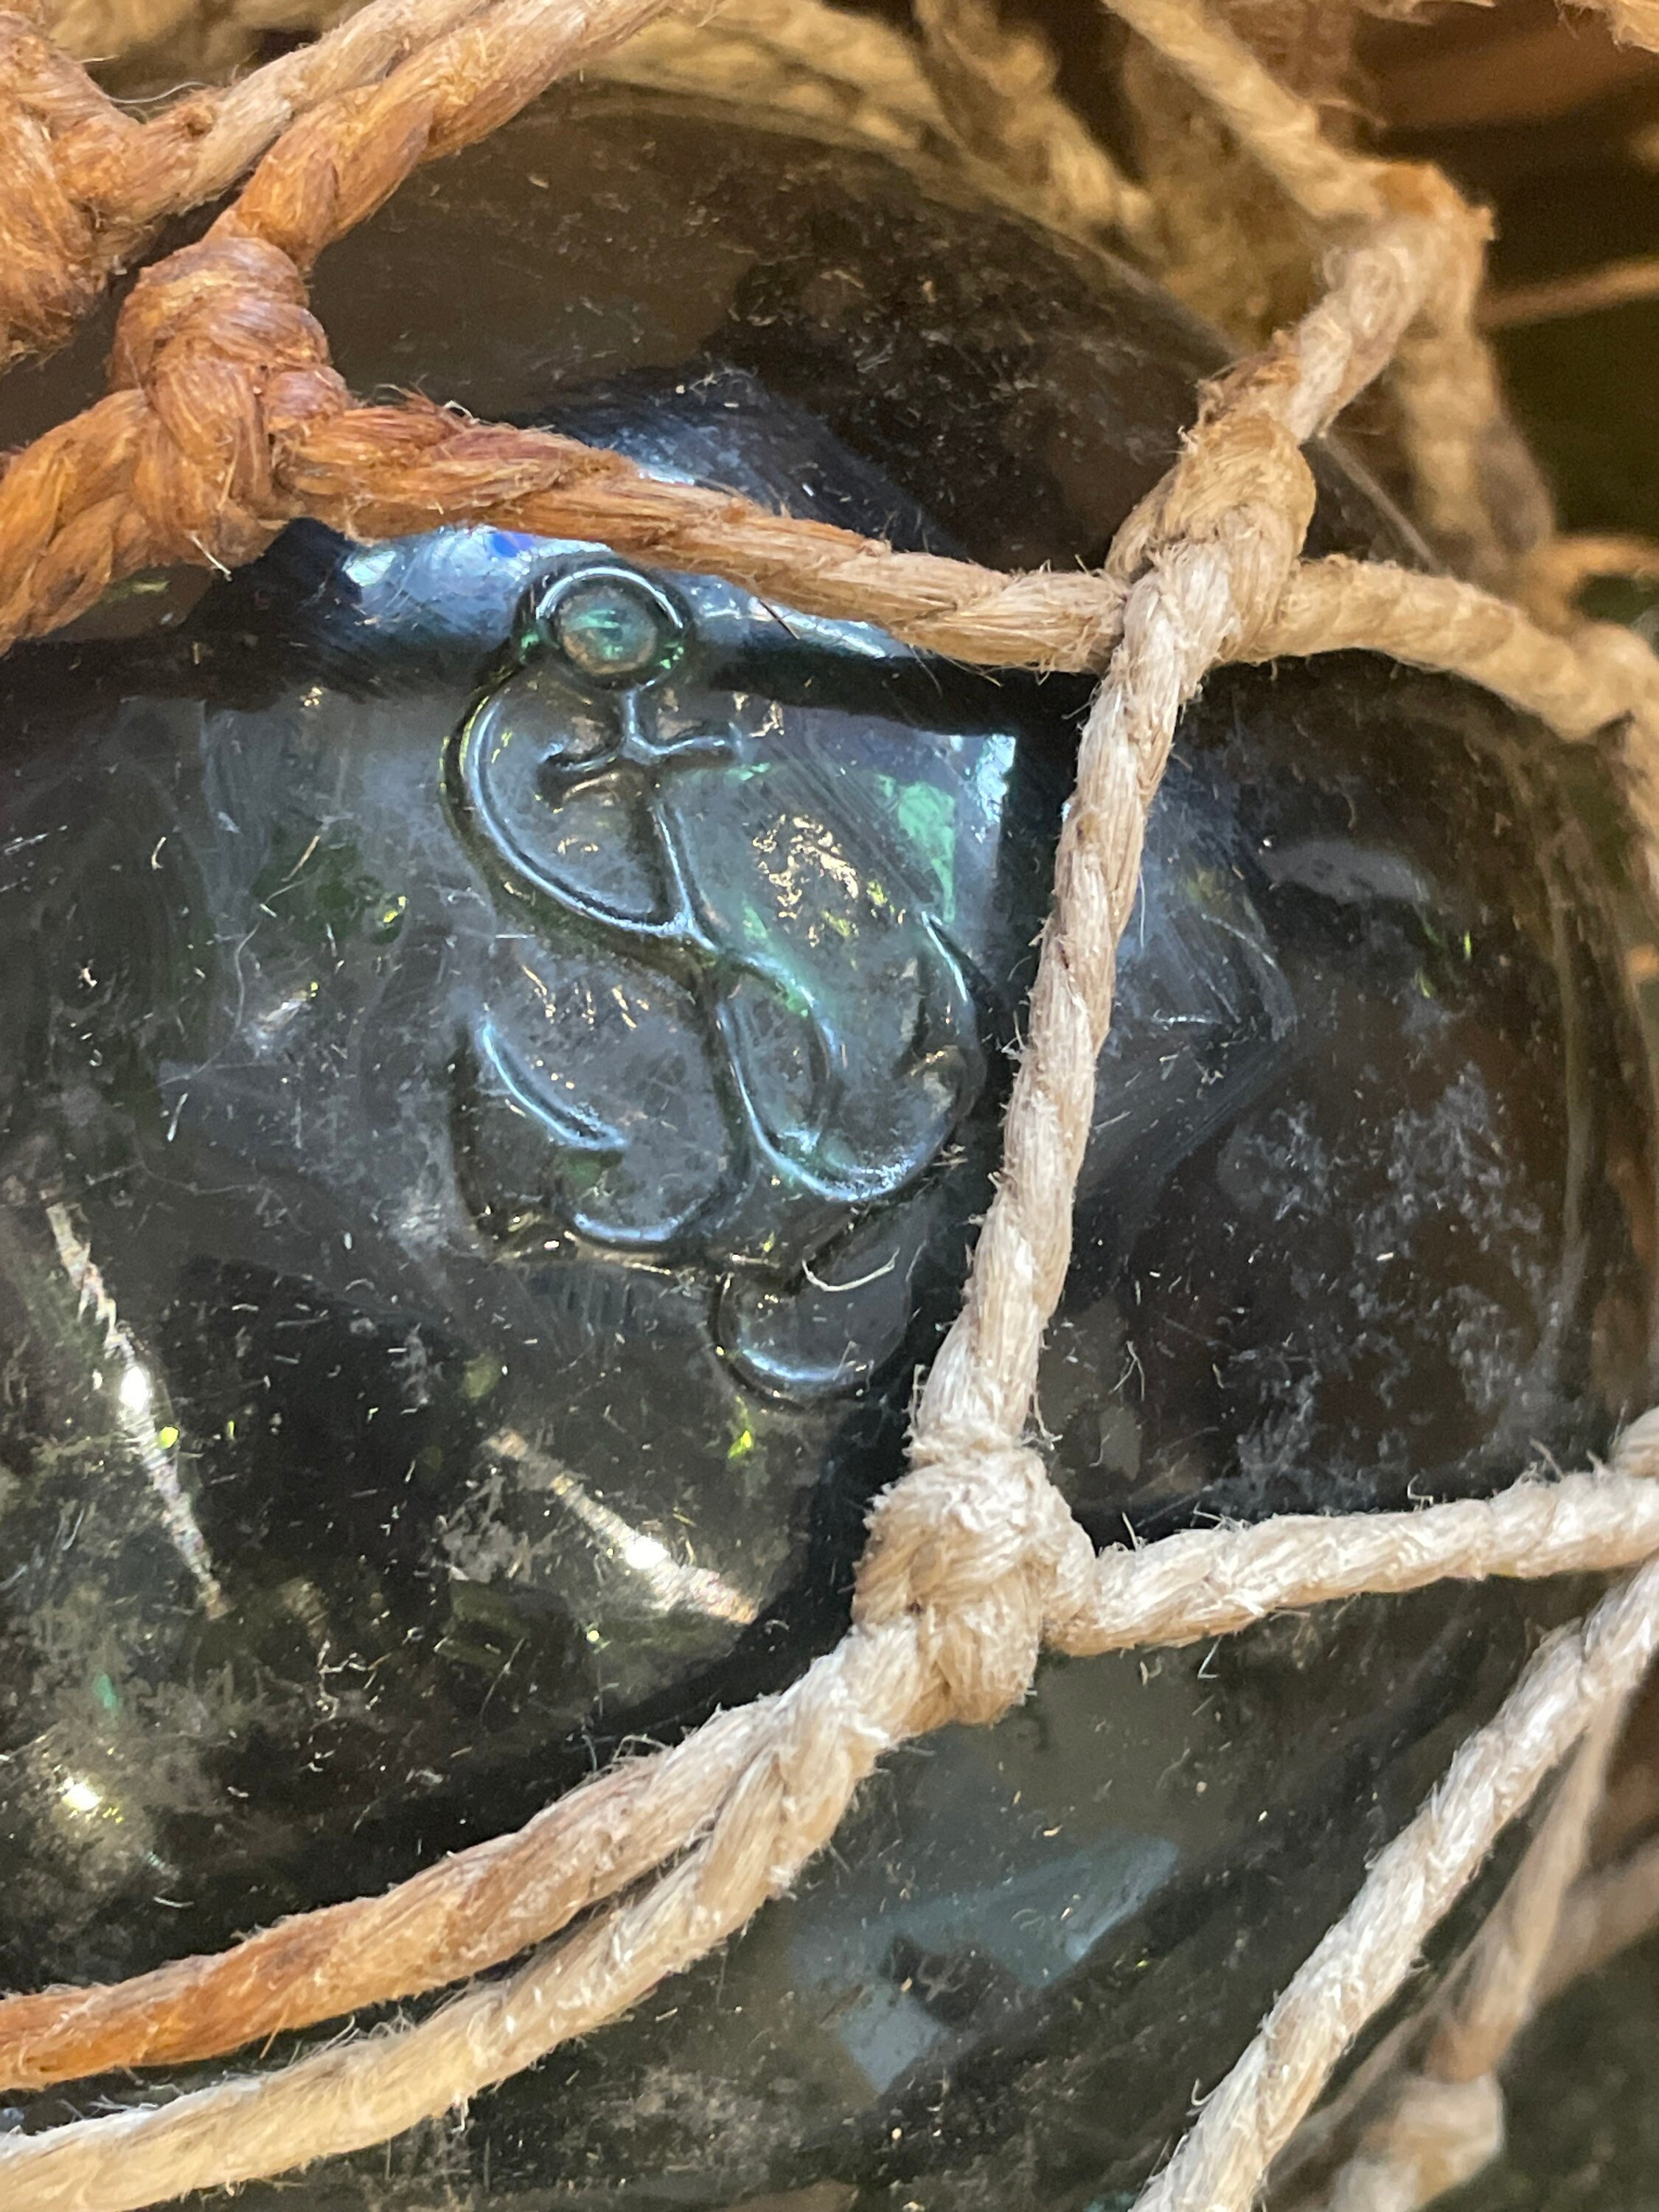 Japanese Glass Floats, Old Fish Net Buoys, Vintage Floats Once Used By  Fisherman In Japan, Assorted Sizes, Mix of Aquas & Greens